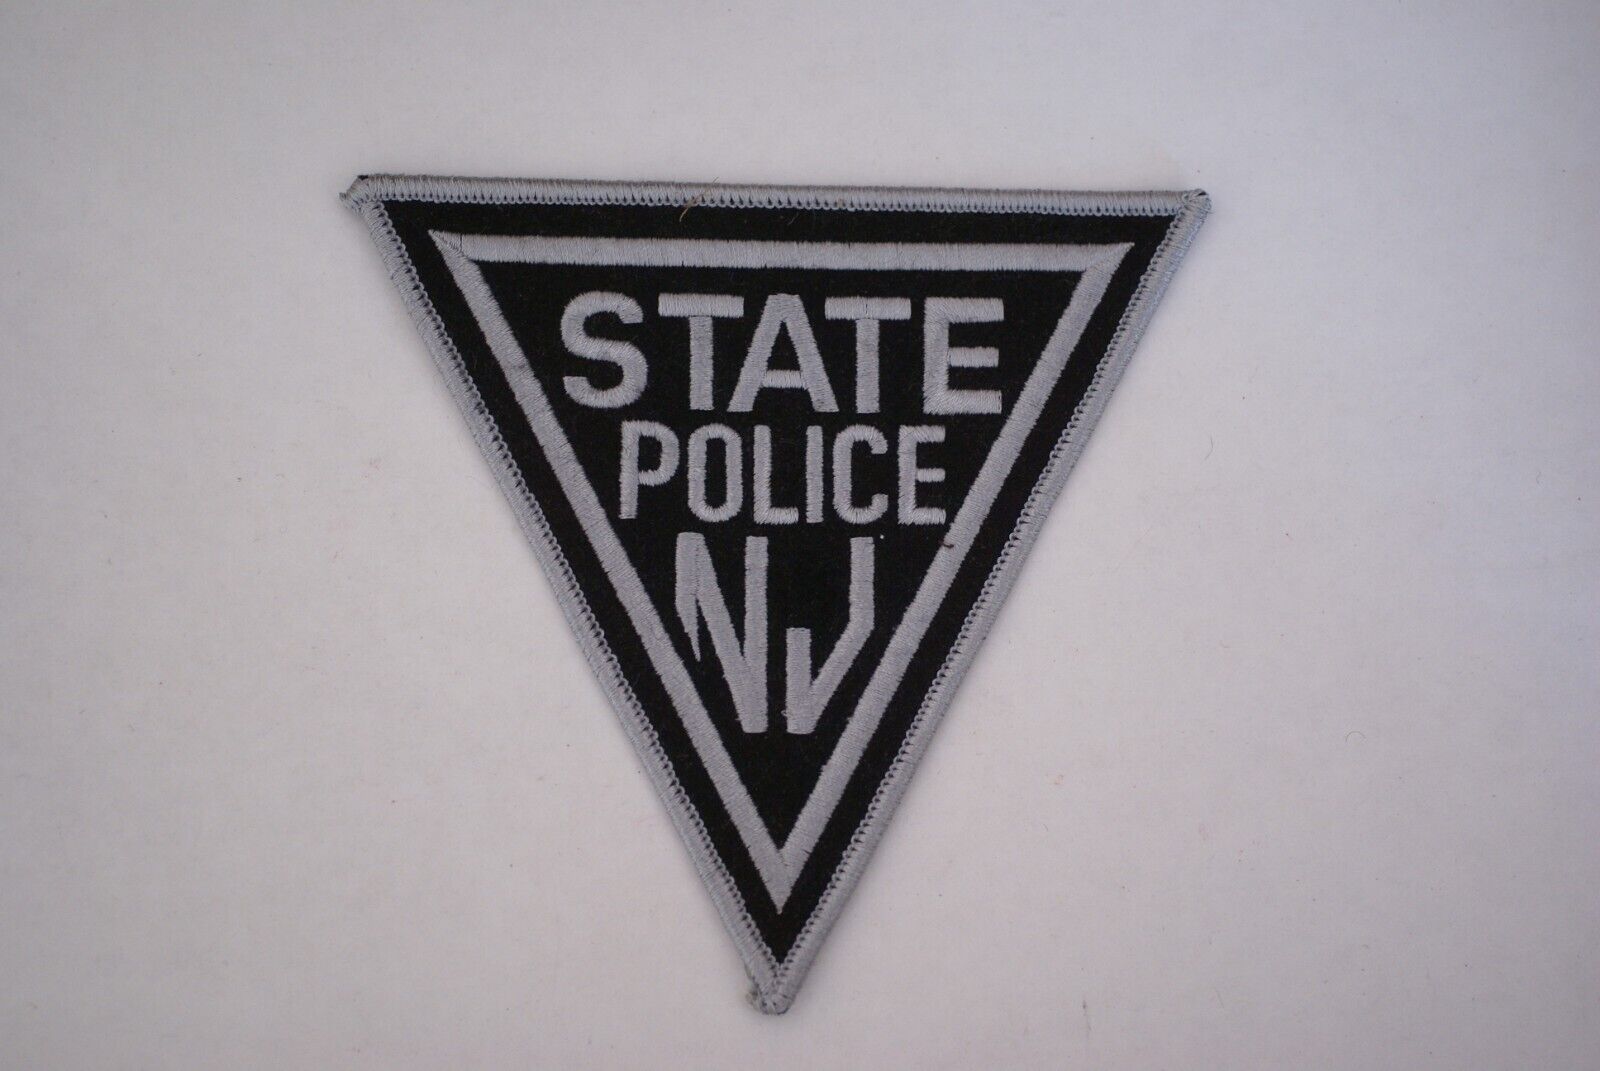 Obsolete New Jersey State Police Subdued Patch